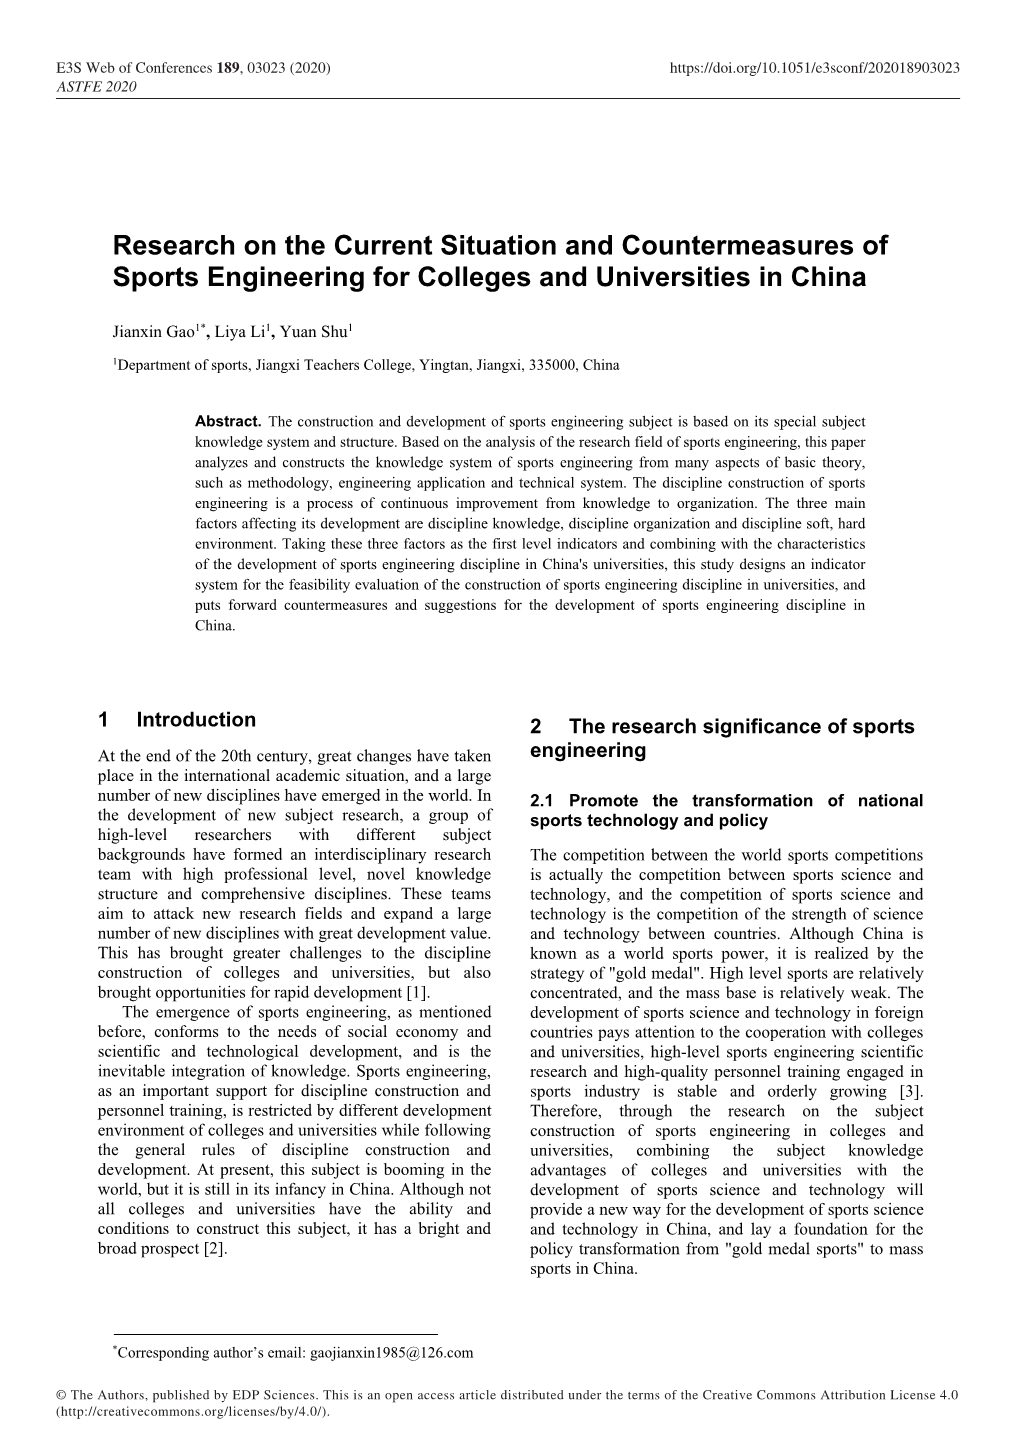 Research on the Current Situation and Countermeasures of Sports Engineering for Colleges and Universities in China